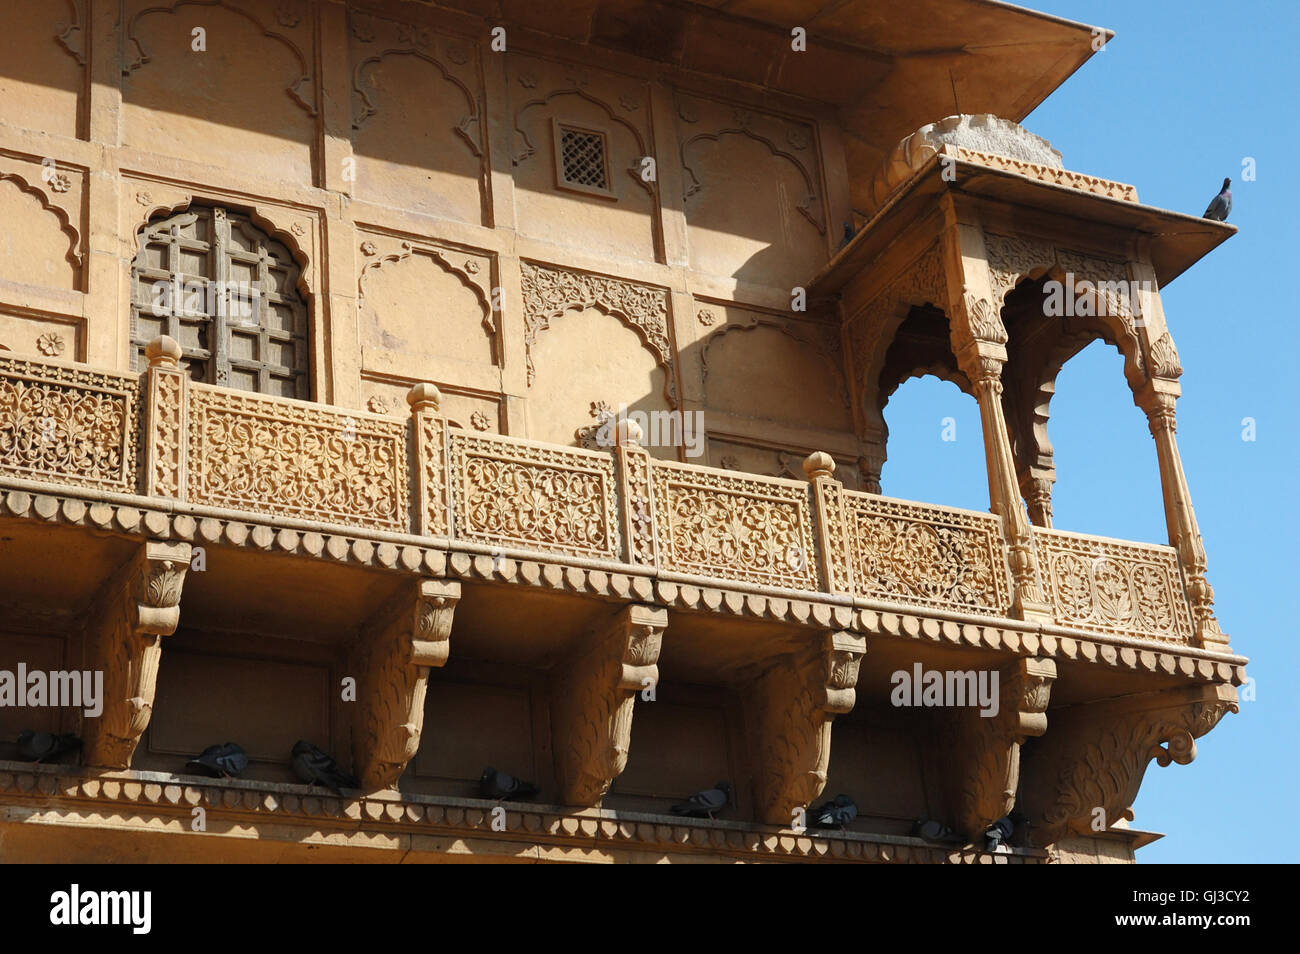 Old Jaisalmer ,city museum in Thar desert, famous unesco heritage site of Rajasthan,India Stock Photo